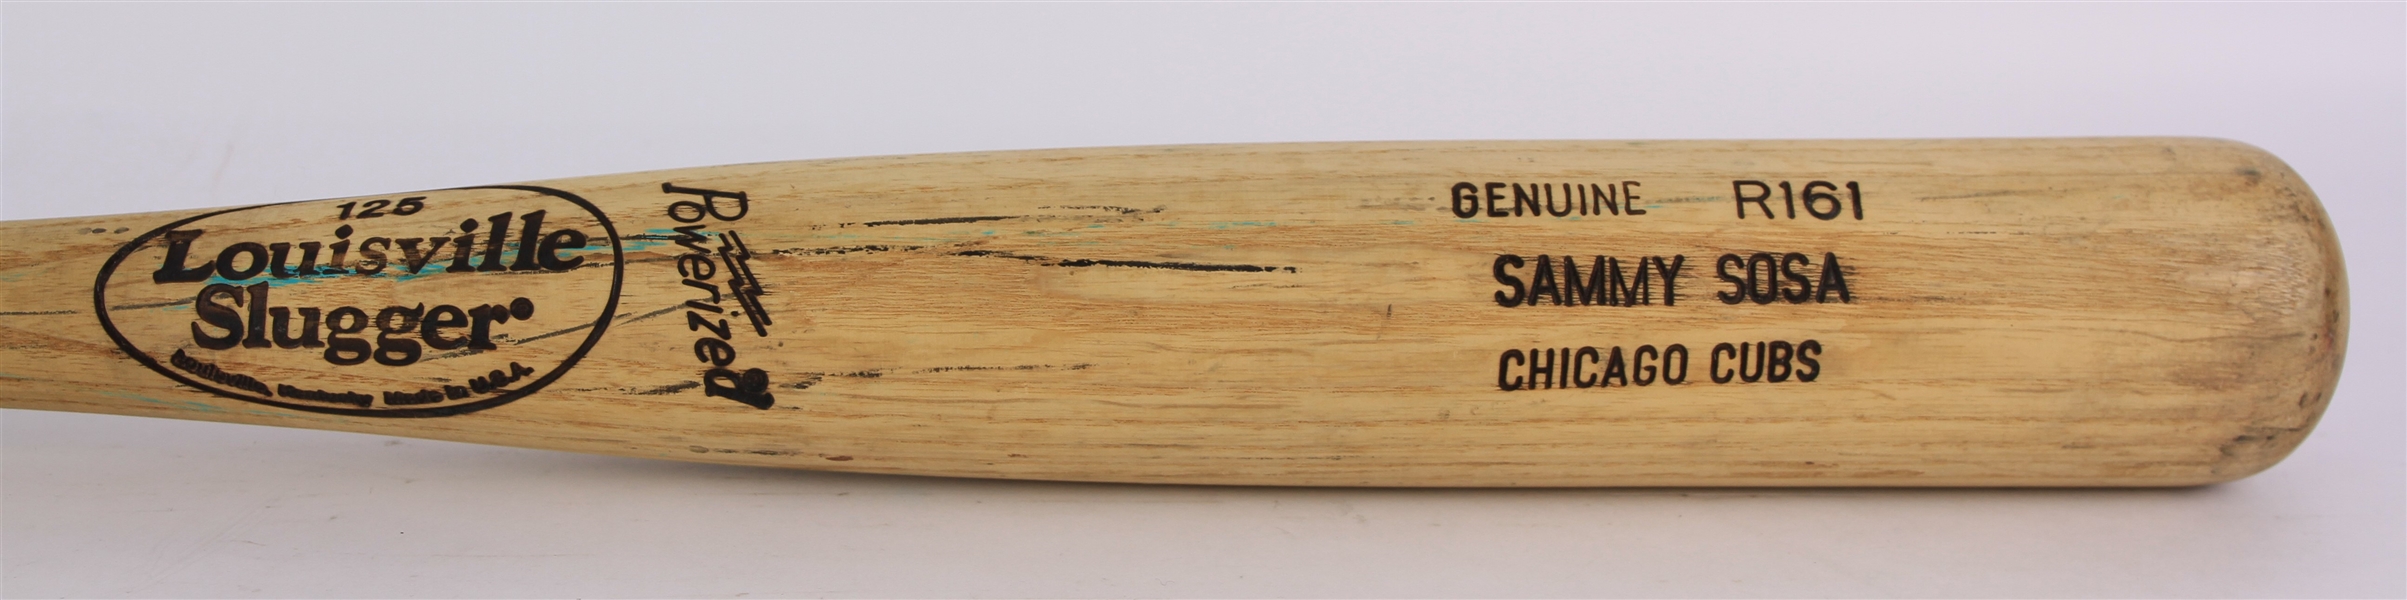 2002-04 Sammy Sosa Chicago Cubs Louisville Slugger Professional Model Game Used Bat (MEARS A8)